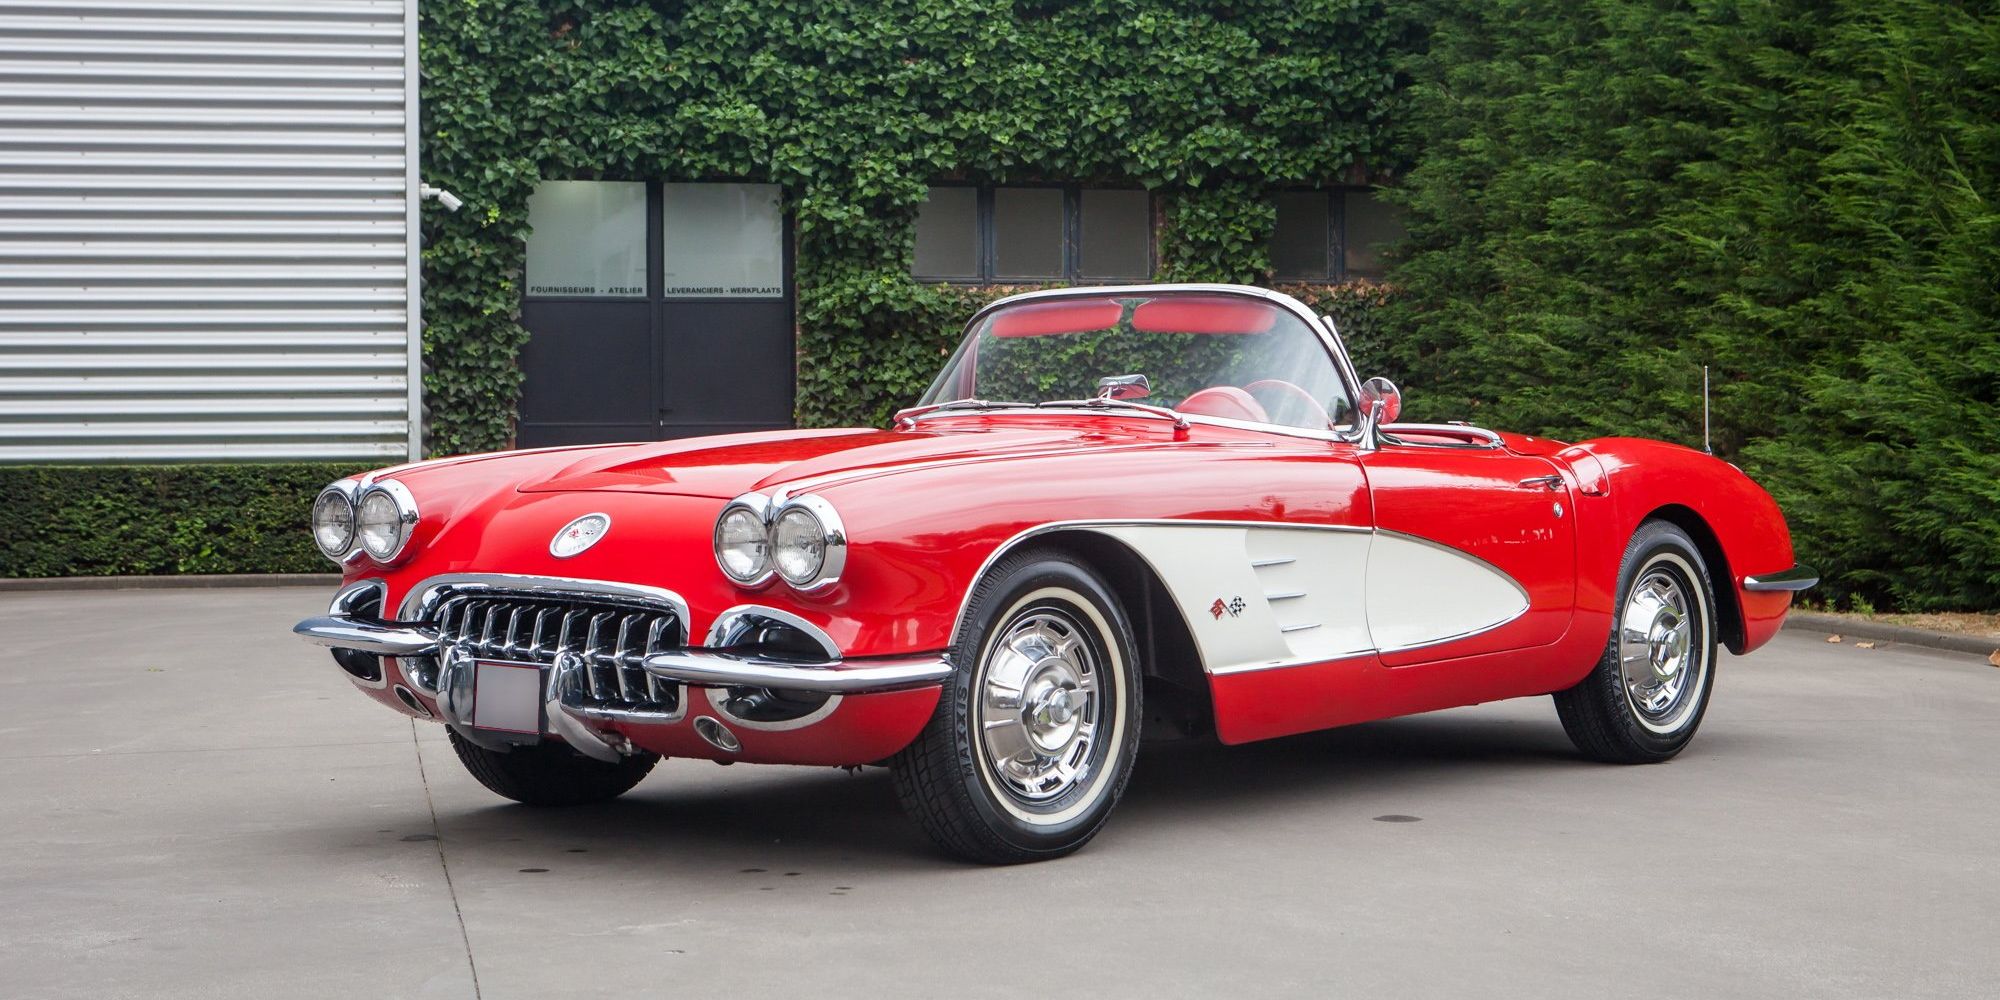 Front 3/4 view of a red C1 Corvette